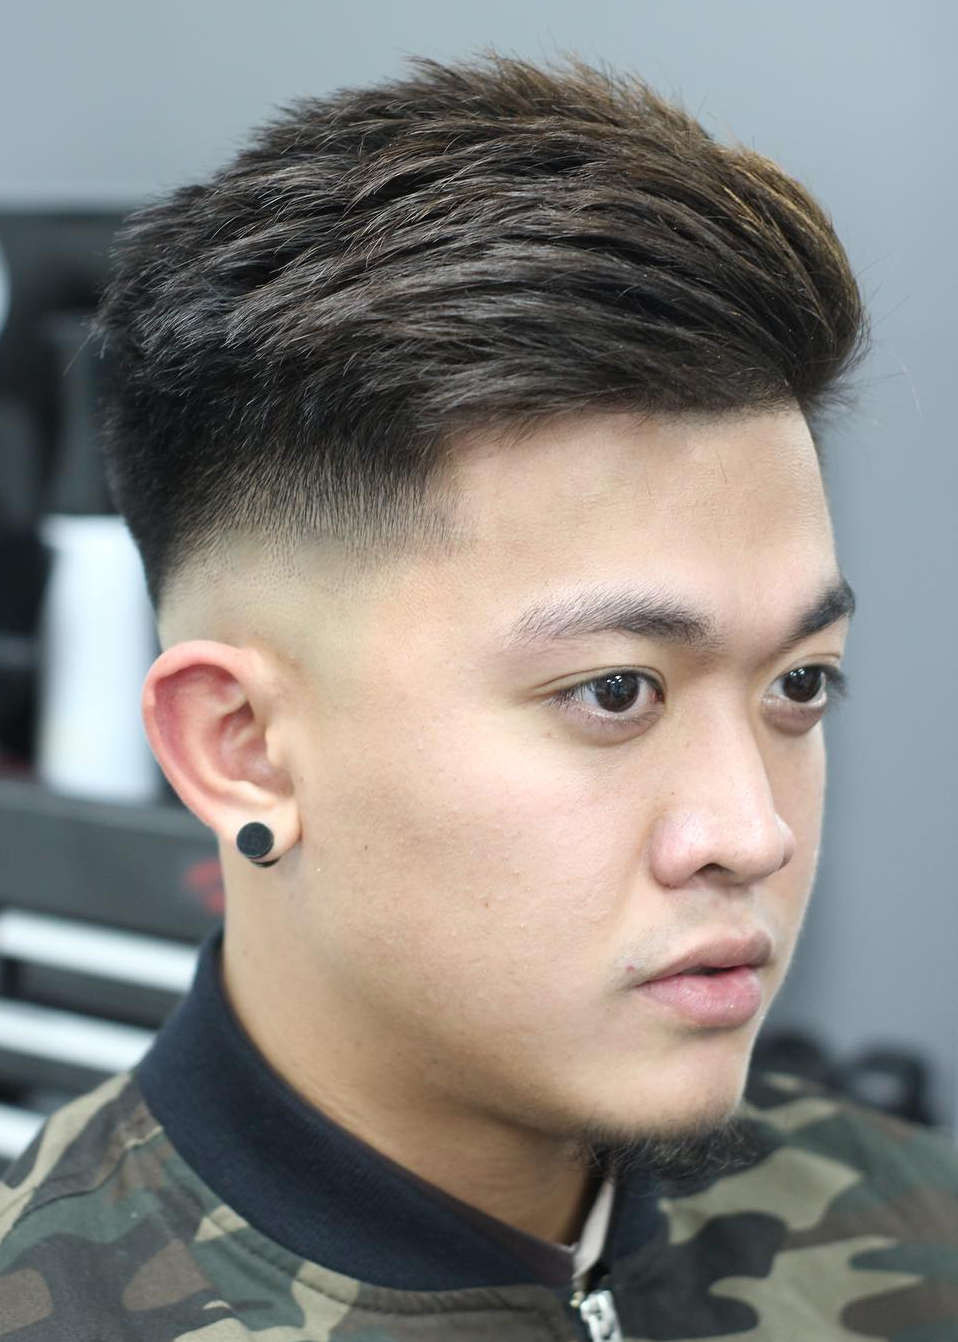 Asian Male Hairstyle
 Top 30 Trendy Asian Men Hairstyles 2019